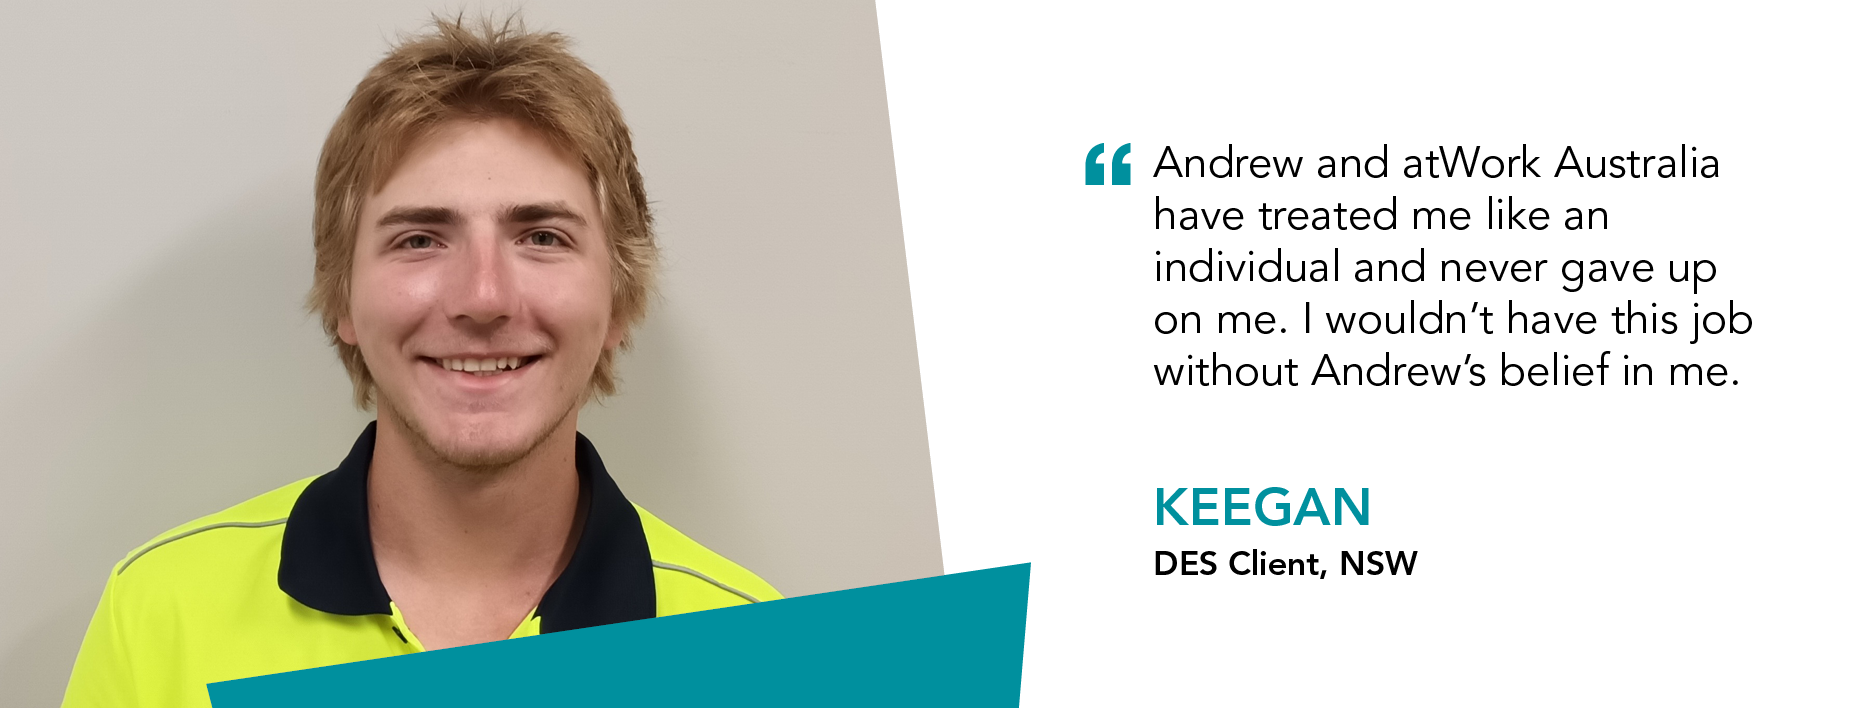 Image of Keegan in high visibility shirt with quoteAndrew and atWork Australia have treated me like an individual and never gave up on me. I wouldn't have this job without Andrew's belief in me - Keegan DES Client, NSW 